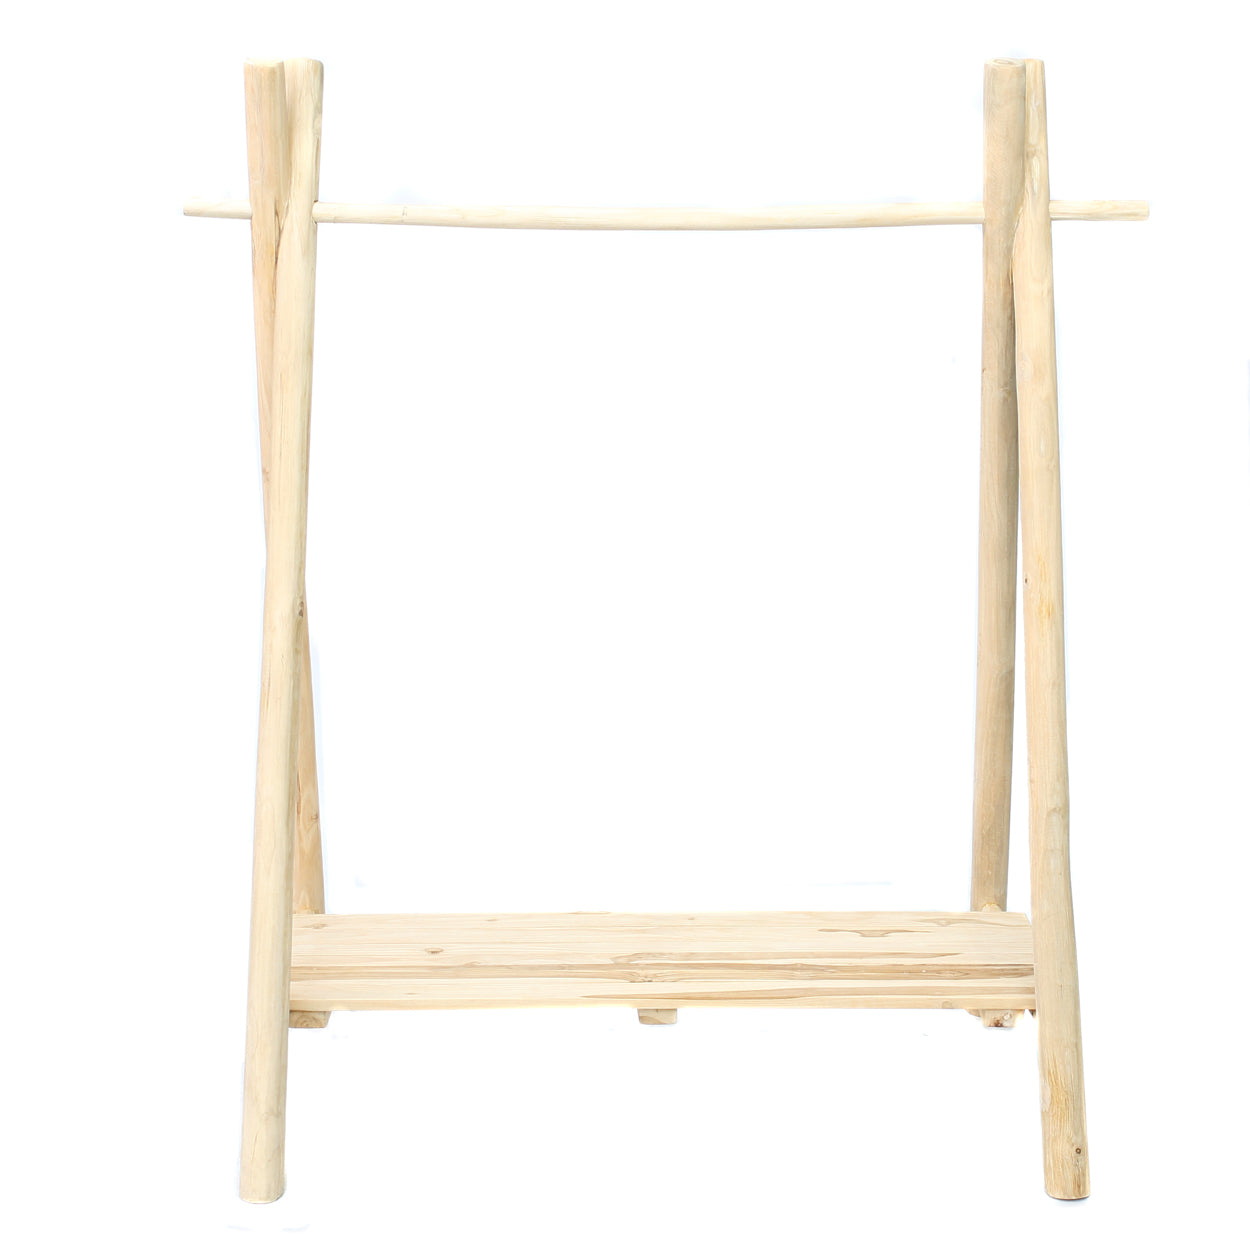 The Clothes Rack - Natural